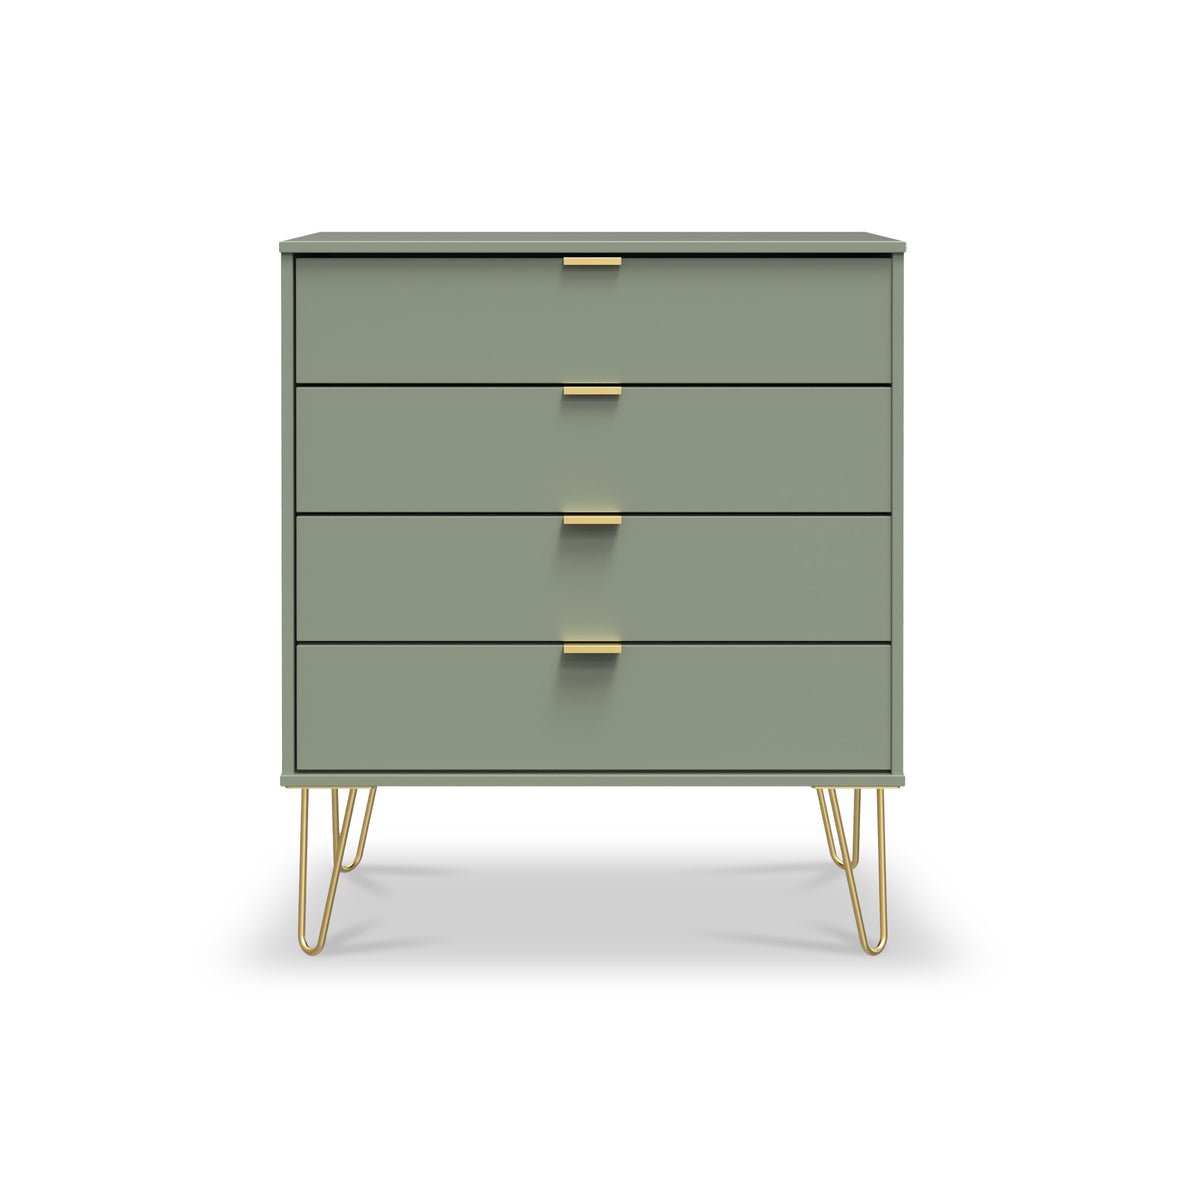 Moreno Olive Green 4 Drawer Chest with gold hairpin legs from Roseland furniture